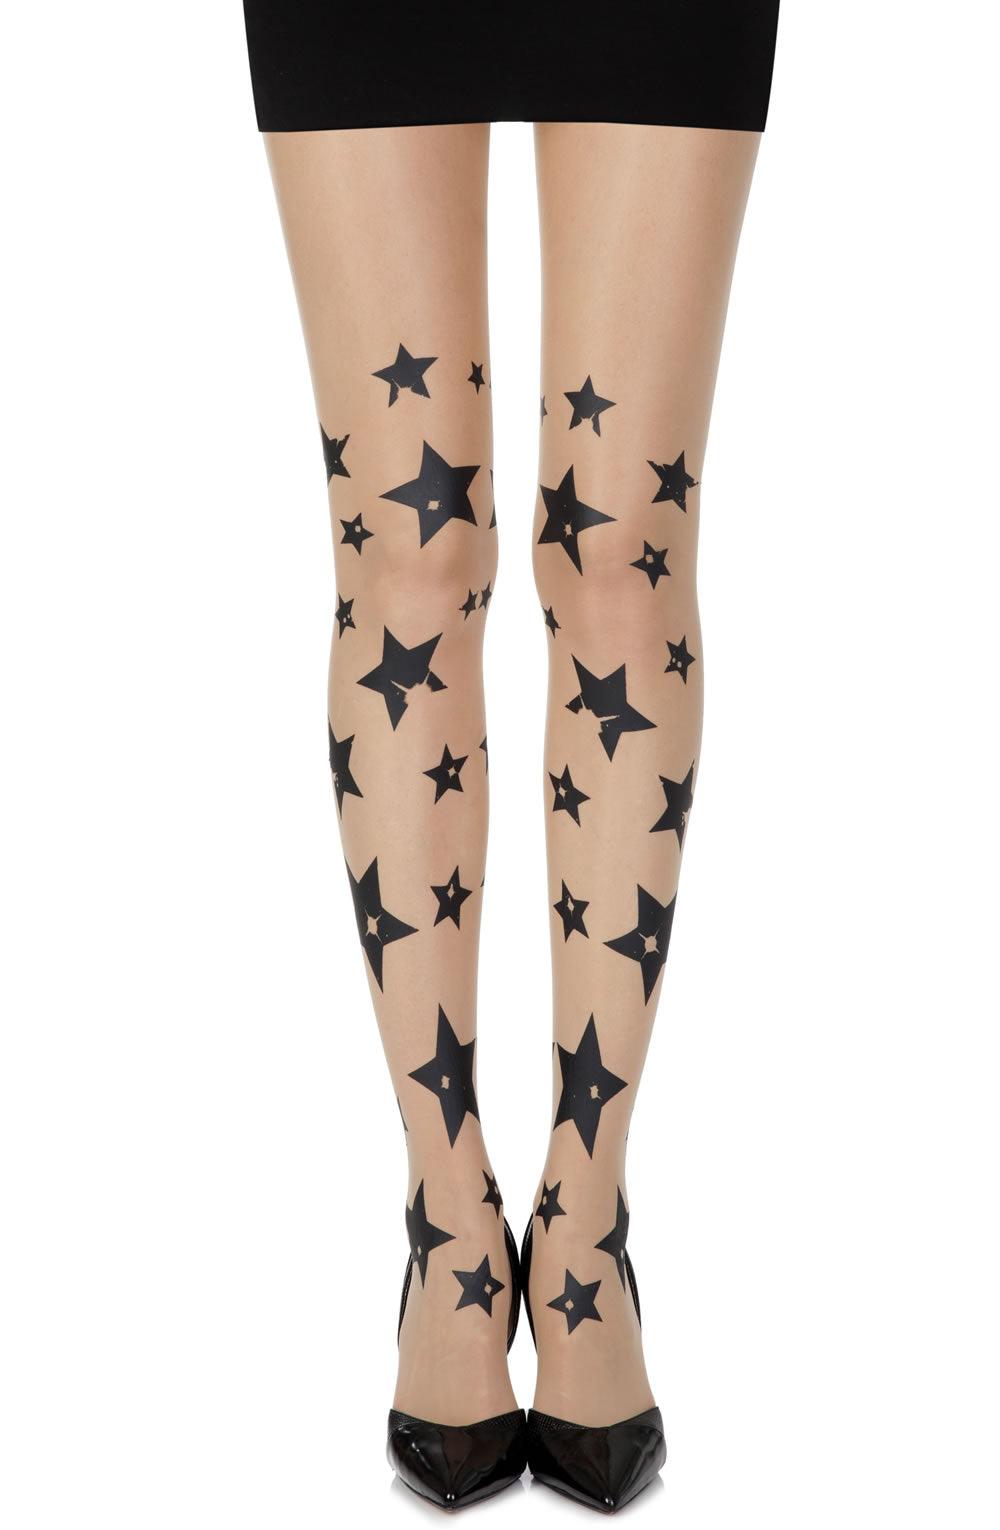 Zohara &quot;Shooting Stars&quot; Skin Sheer Print Tights - Sydney Rose Lingerie 